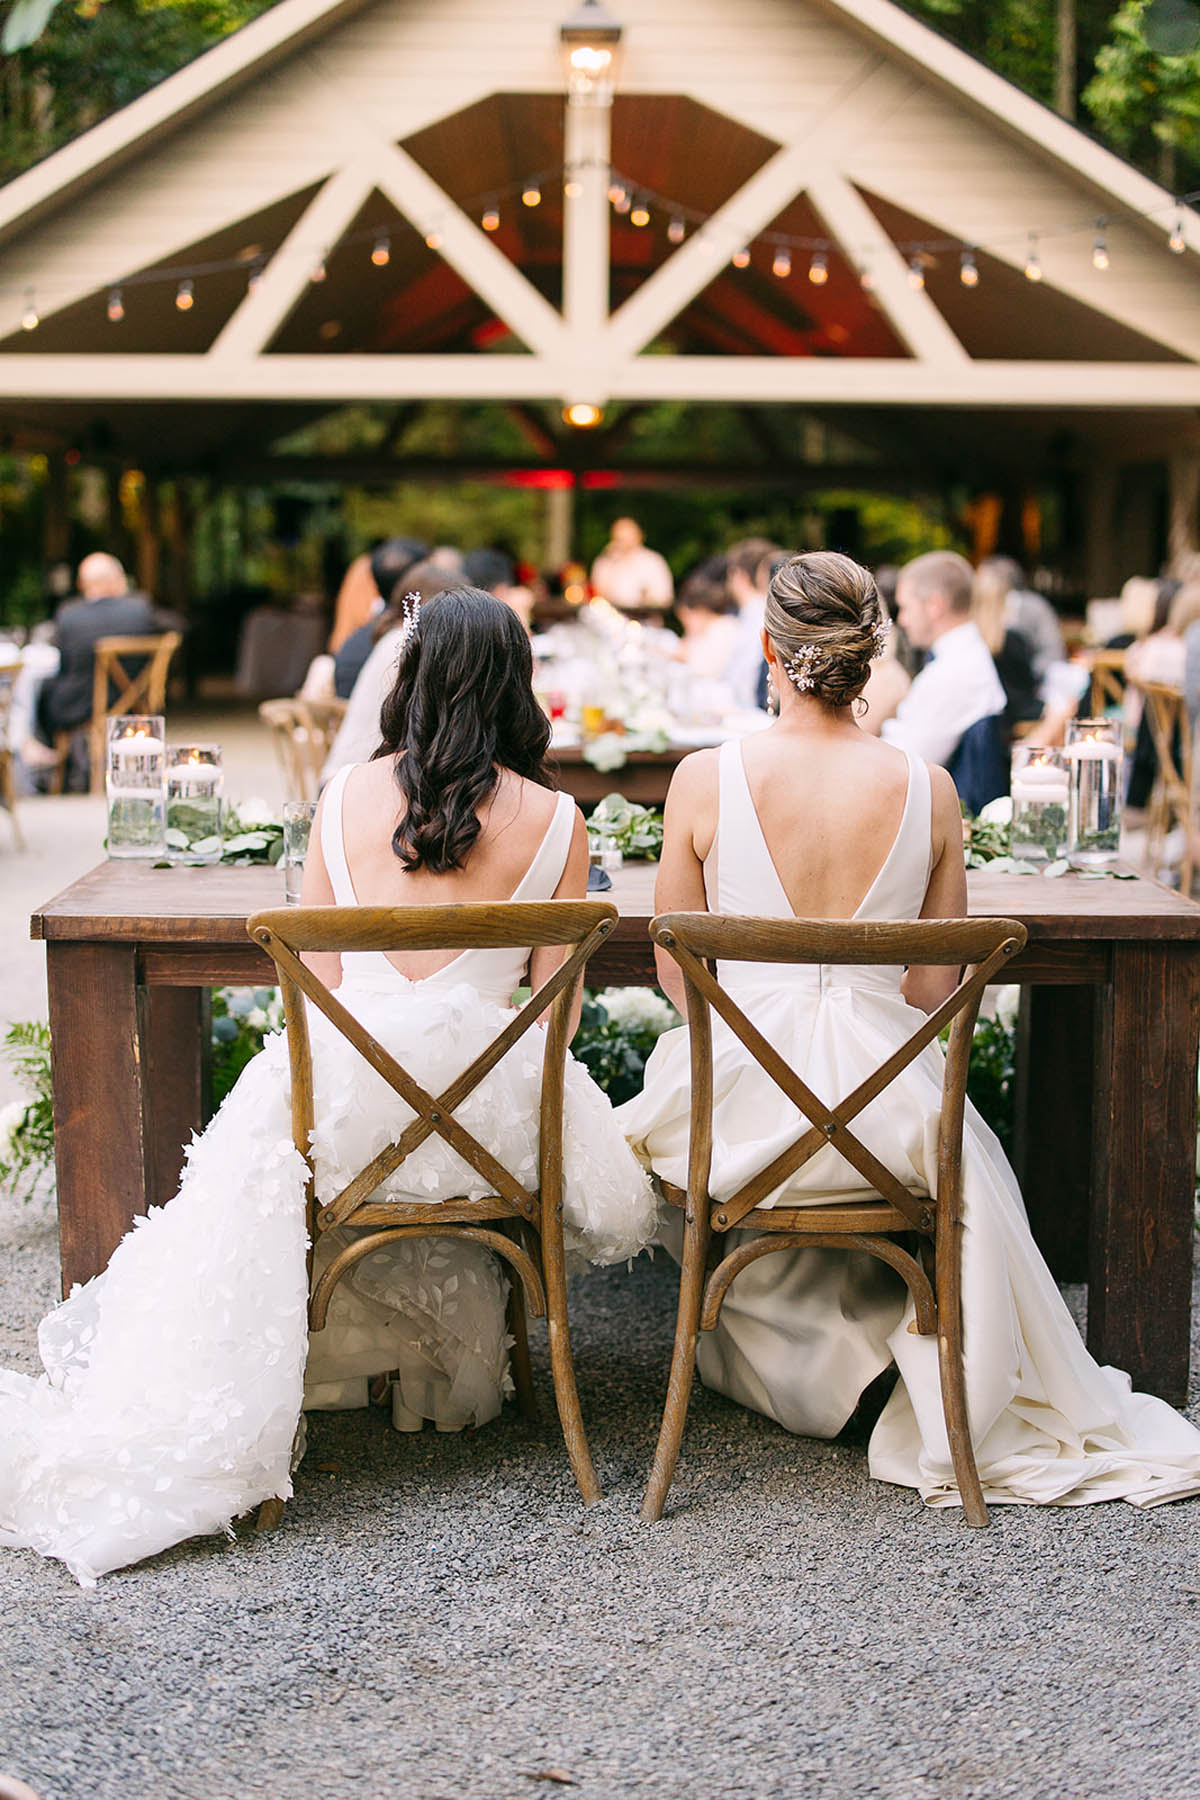 Two brides sit at a sweetheart table in front of a barn-like structure at their wedding reception.